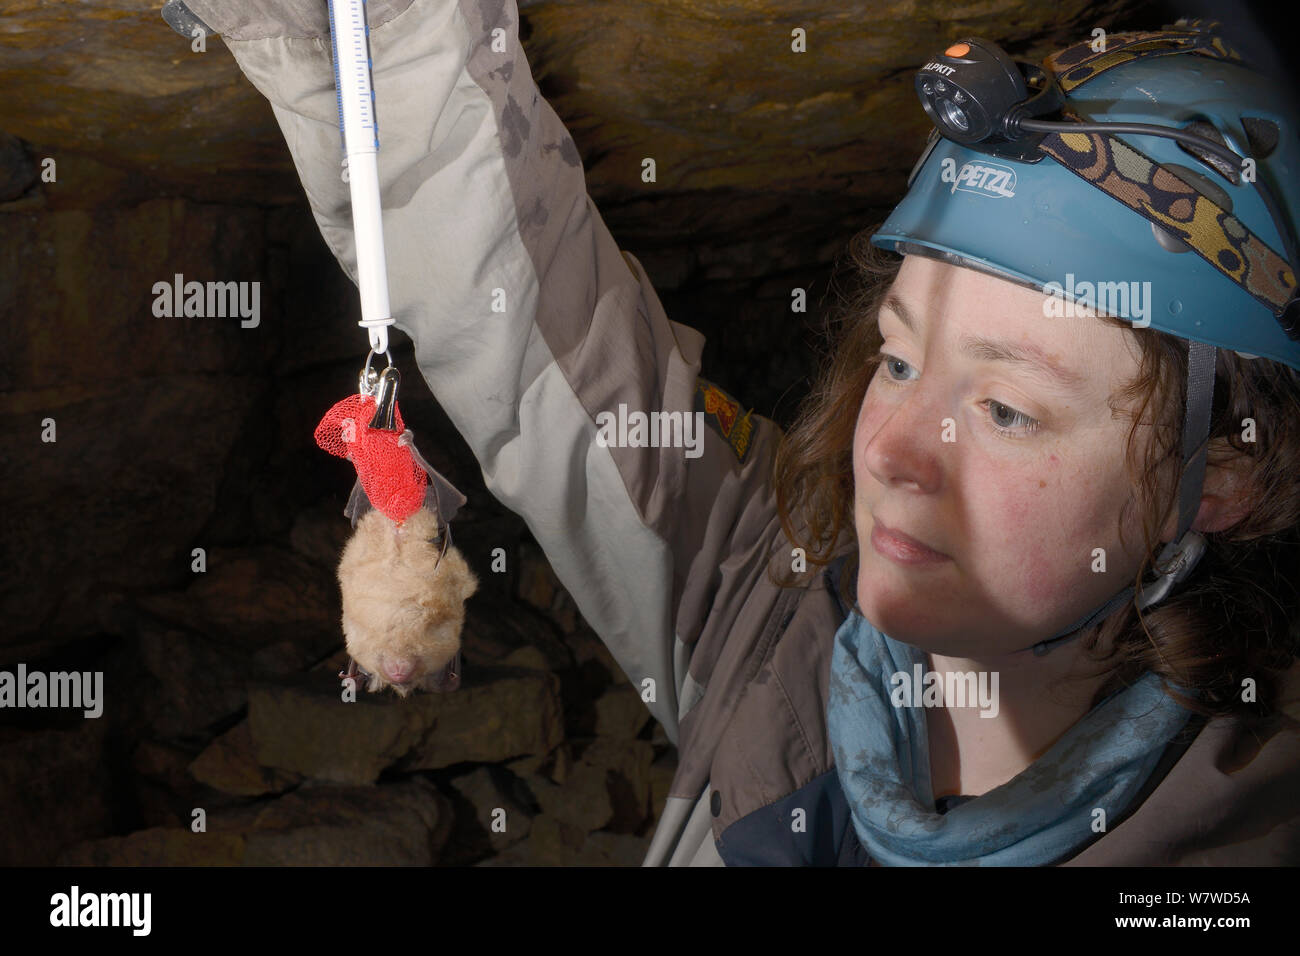 Dr. Danielle Linton weighing a Greater horseshoe bat (Rhinolophus ferrumequinum) during a winter hibernation survey in an old Bath stone mine, Wiltshire, UK, February. Model released. Stock Photo